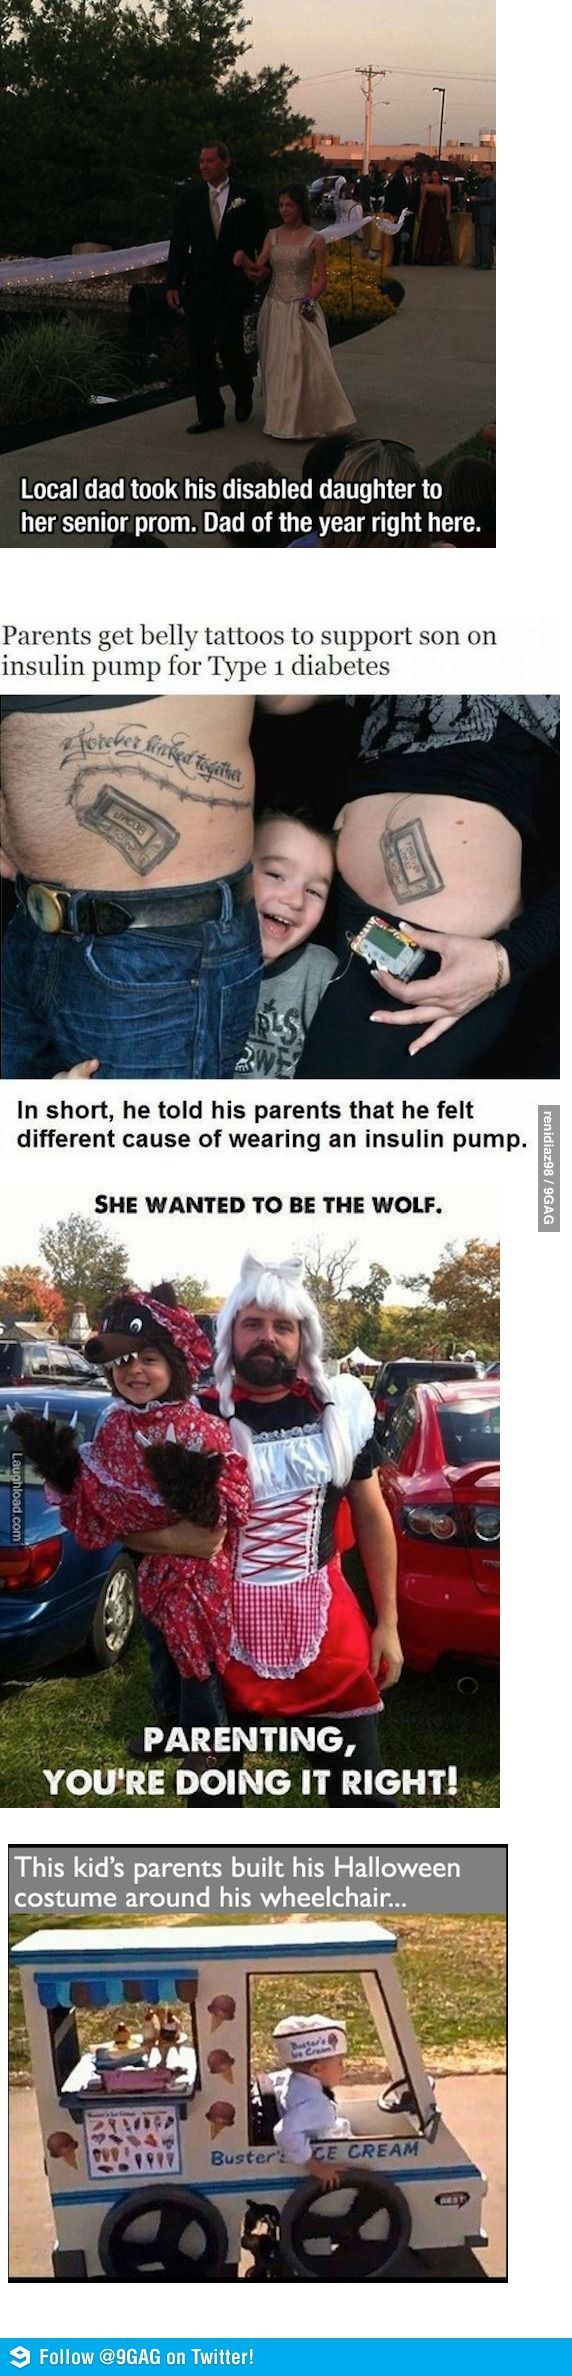 Parenting… you're doing it right!